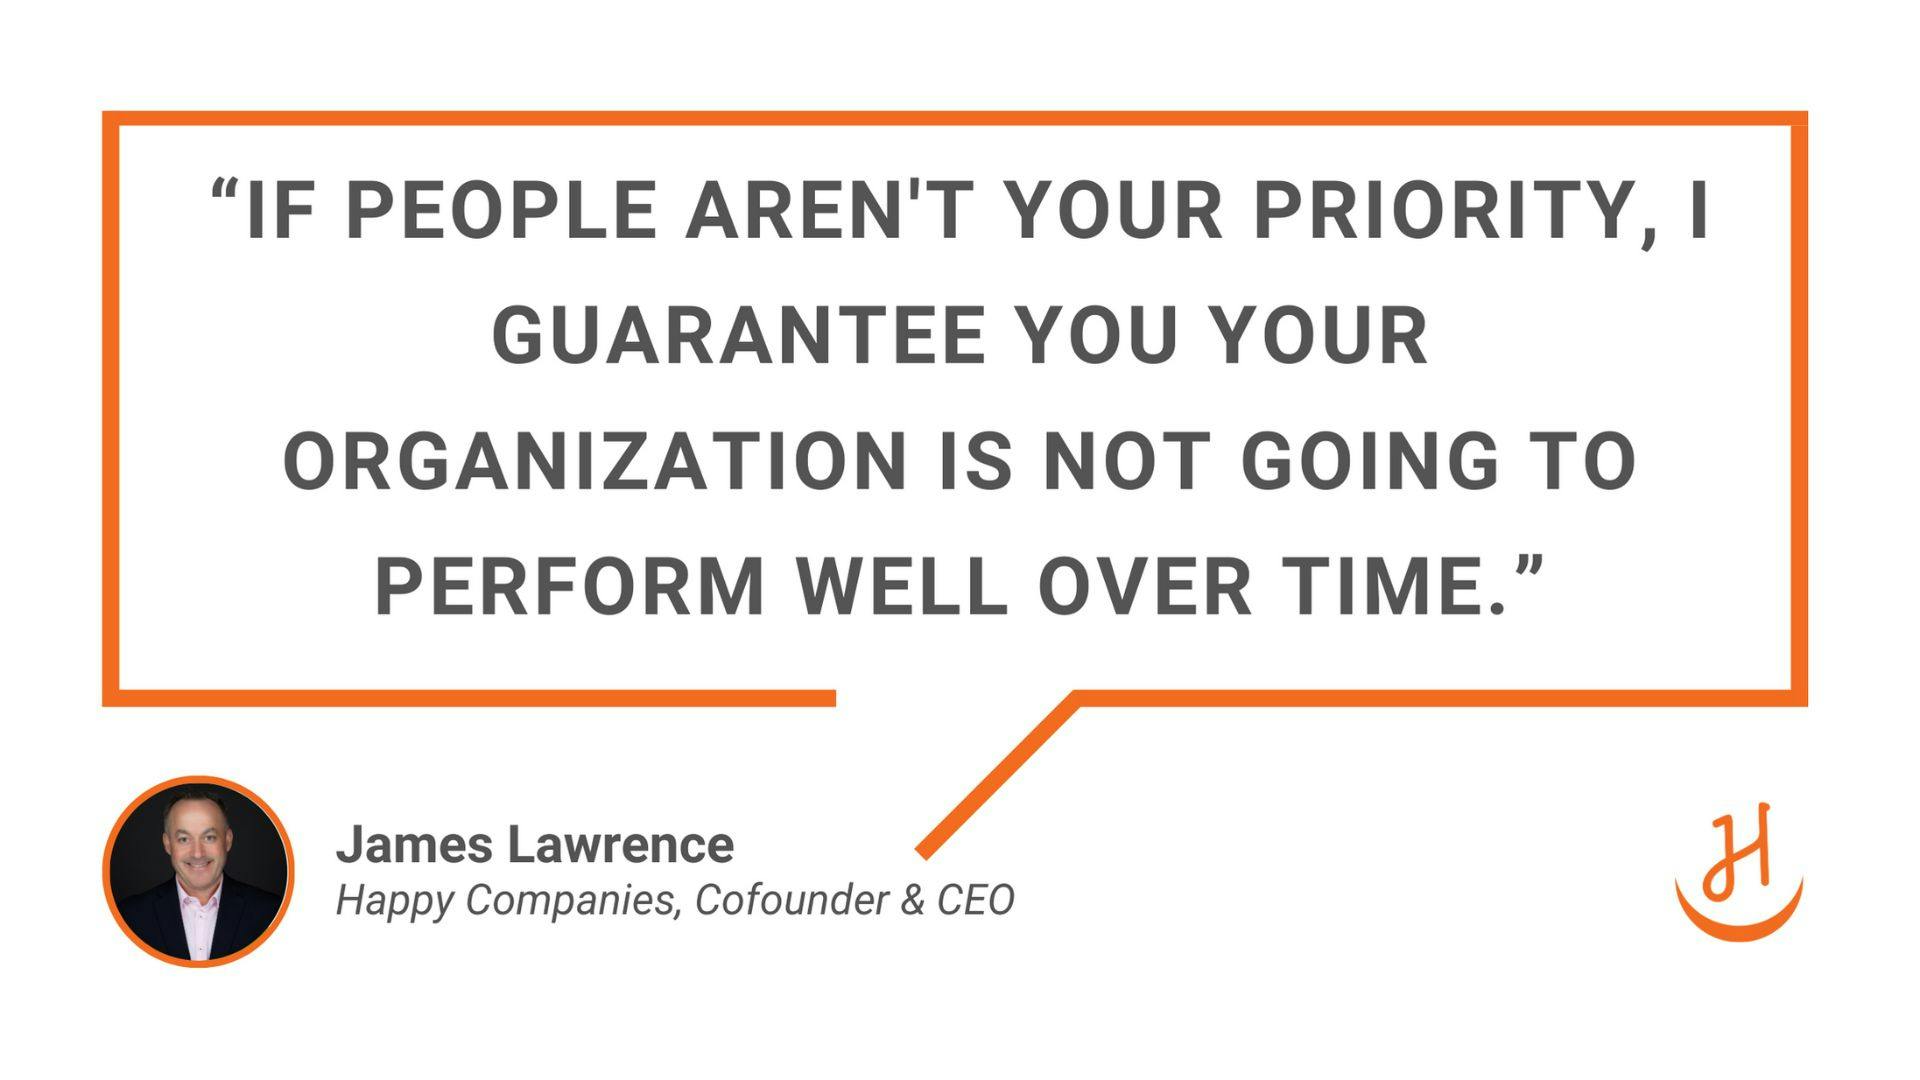 “If people aren't your priority, I guarantee you your organization is not going to perform well over time." Quote by James Lawrence, Happy Companies Cofounder & CEO